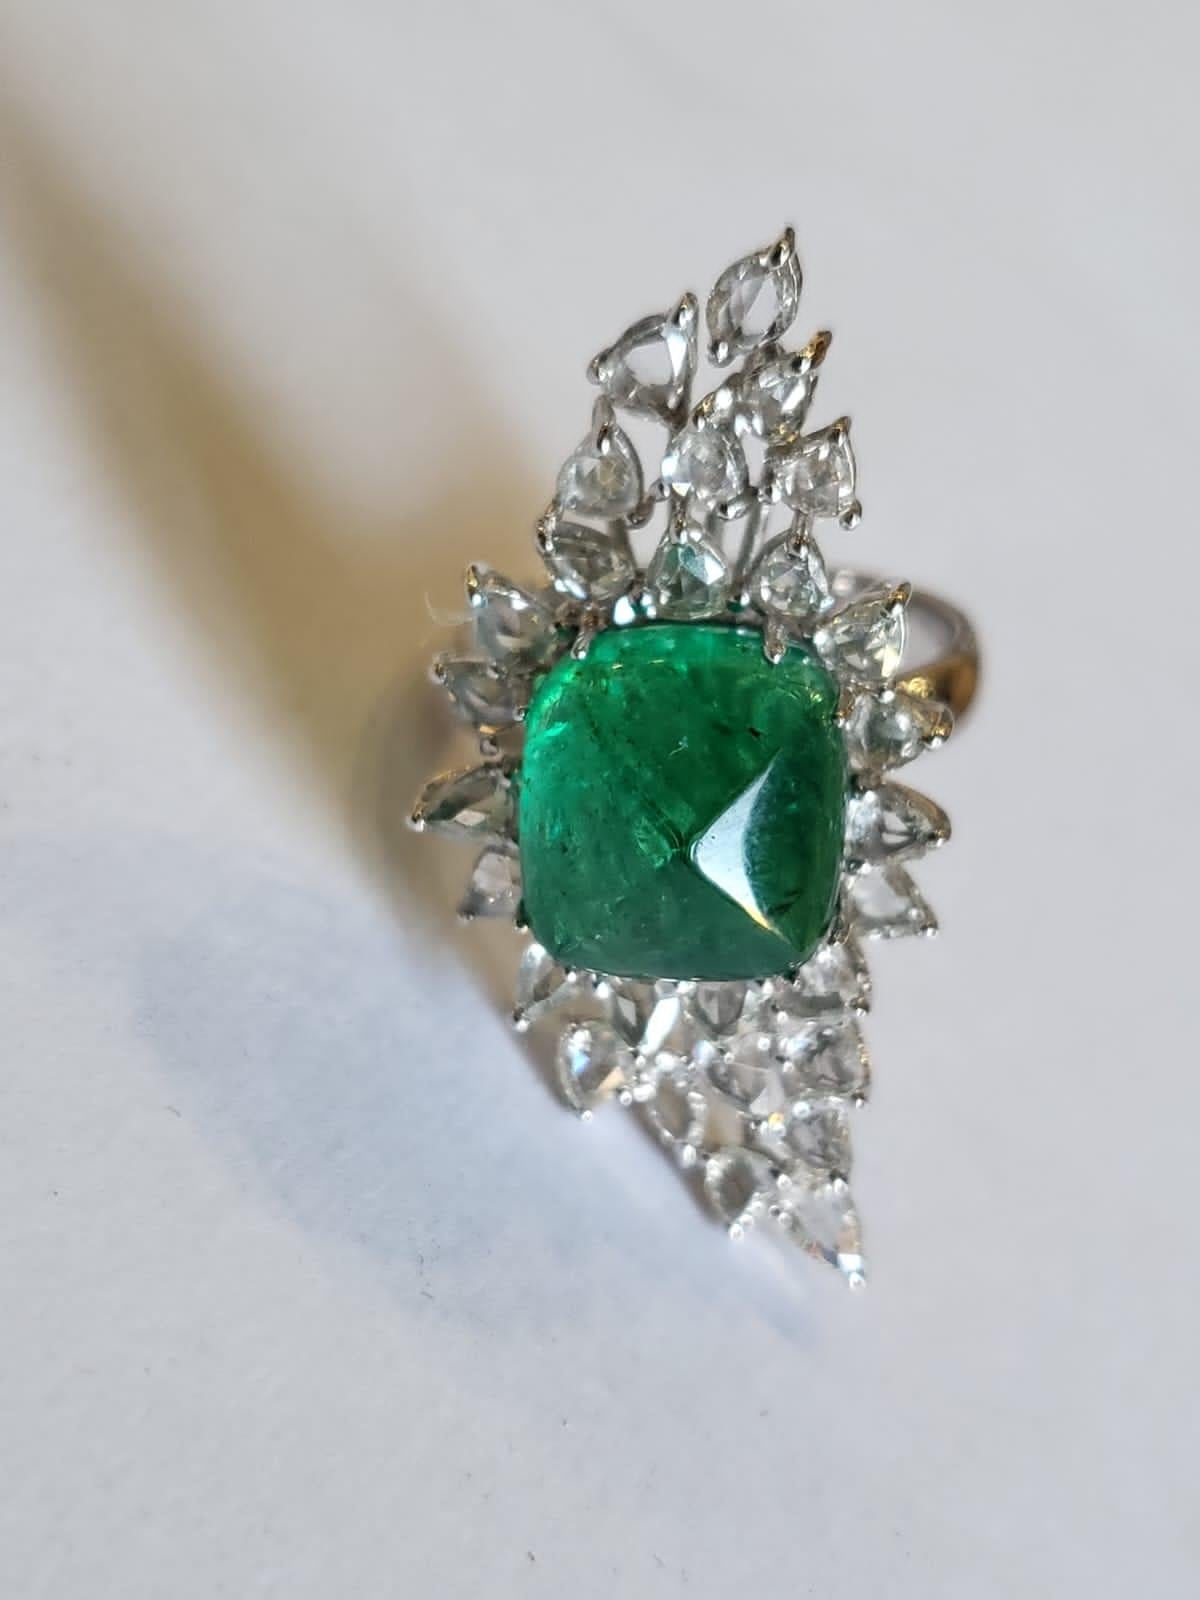 A very gorgeous and one of a kind, Emerald Engagement / Dome Ring set in 18K White Gold & Diamonds. The weight of the Emerald sugarloaf 6.21 carats. The Emerald is completely natural, without any treatment & is of Zambian origin. The weight of the